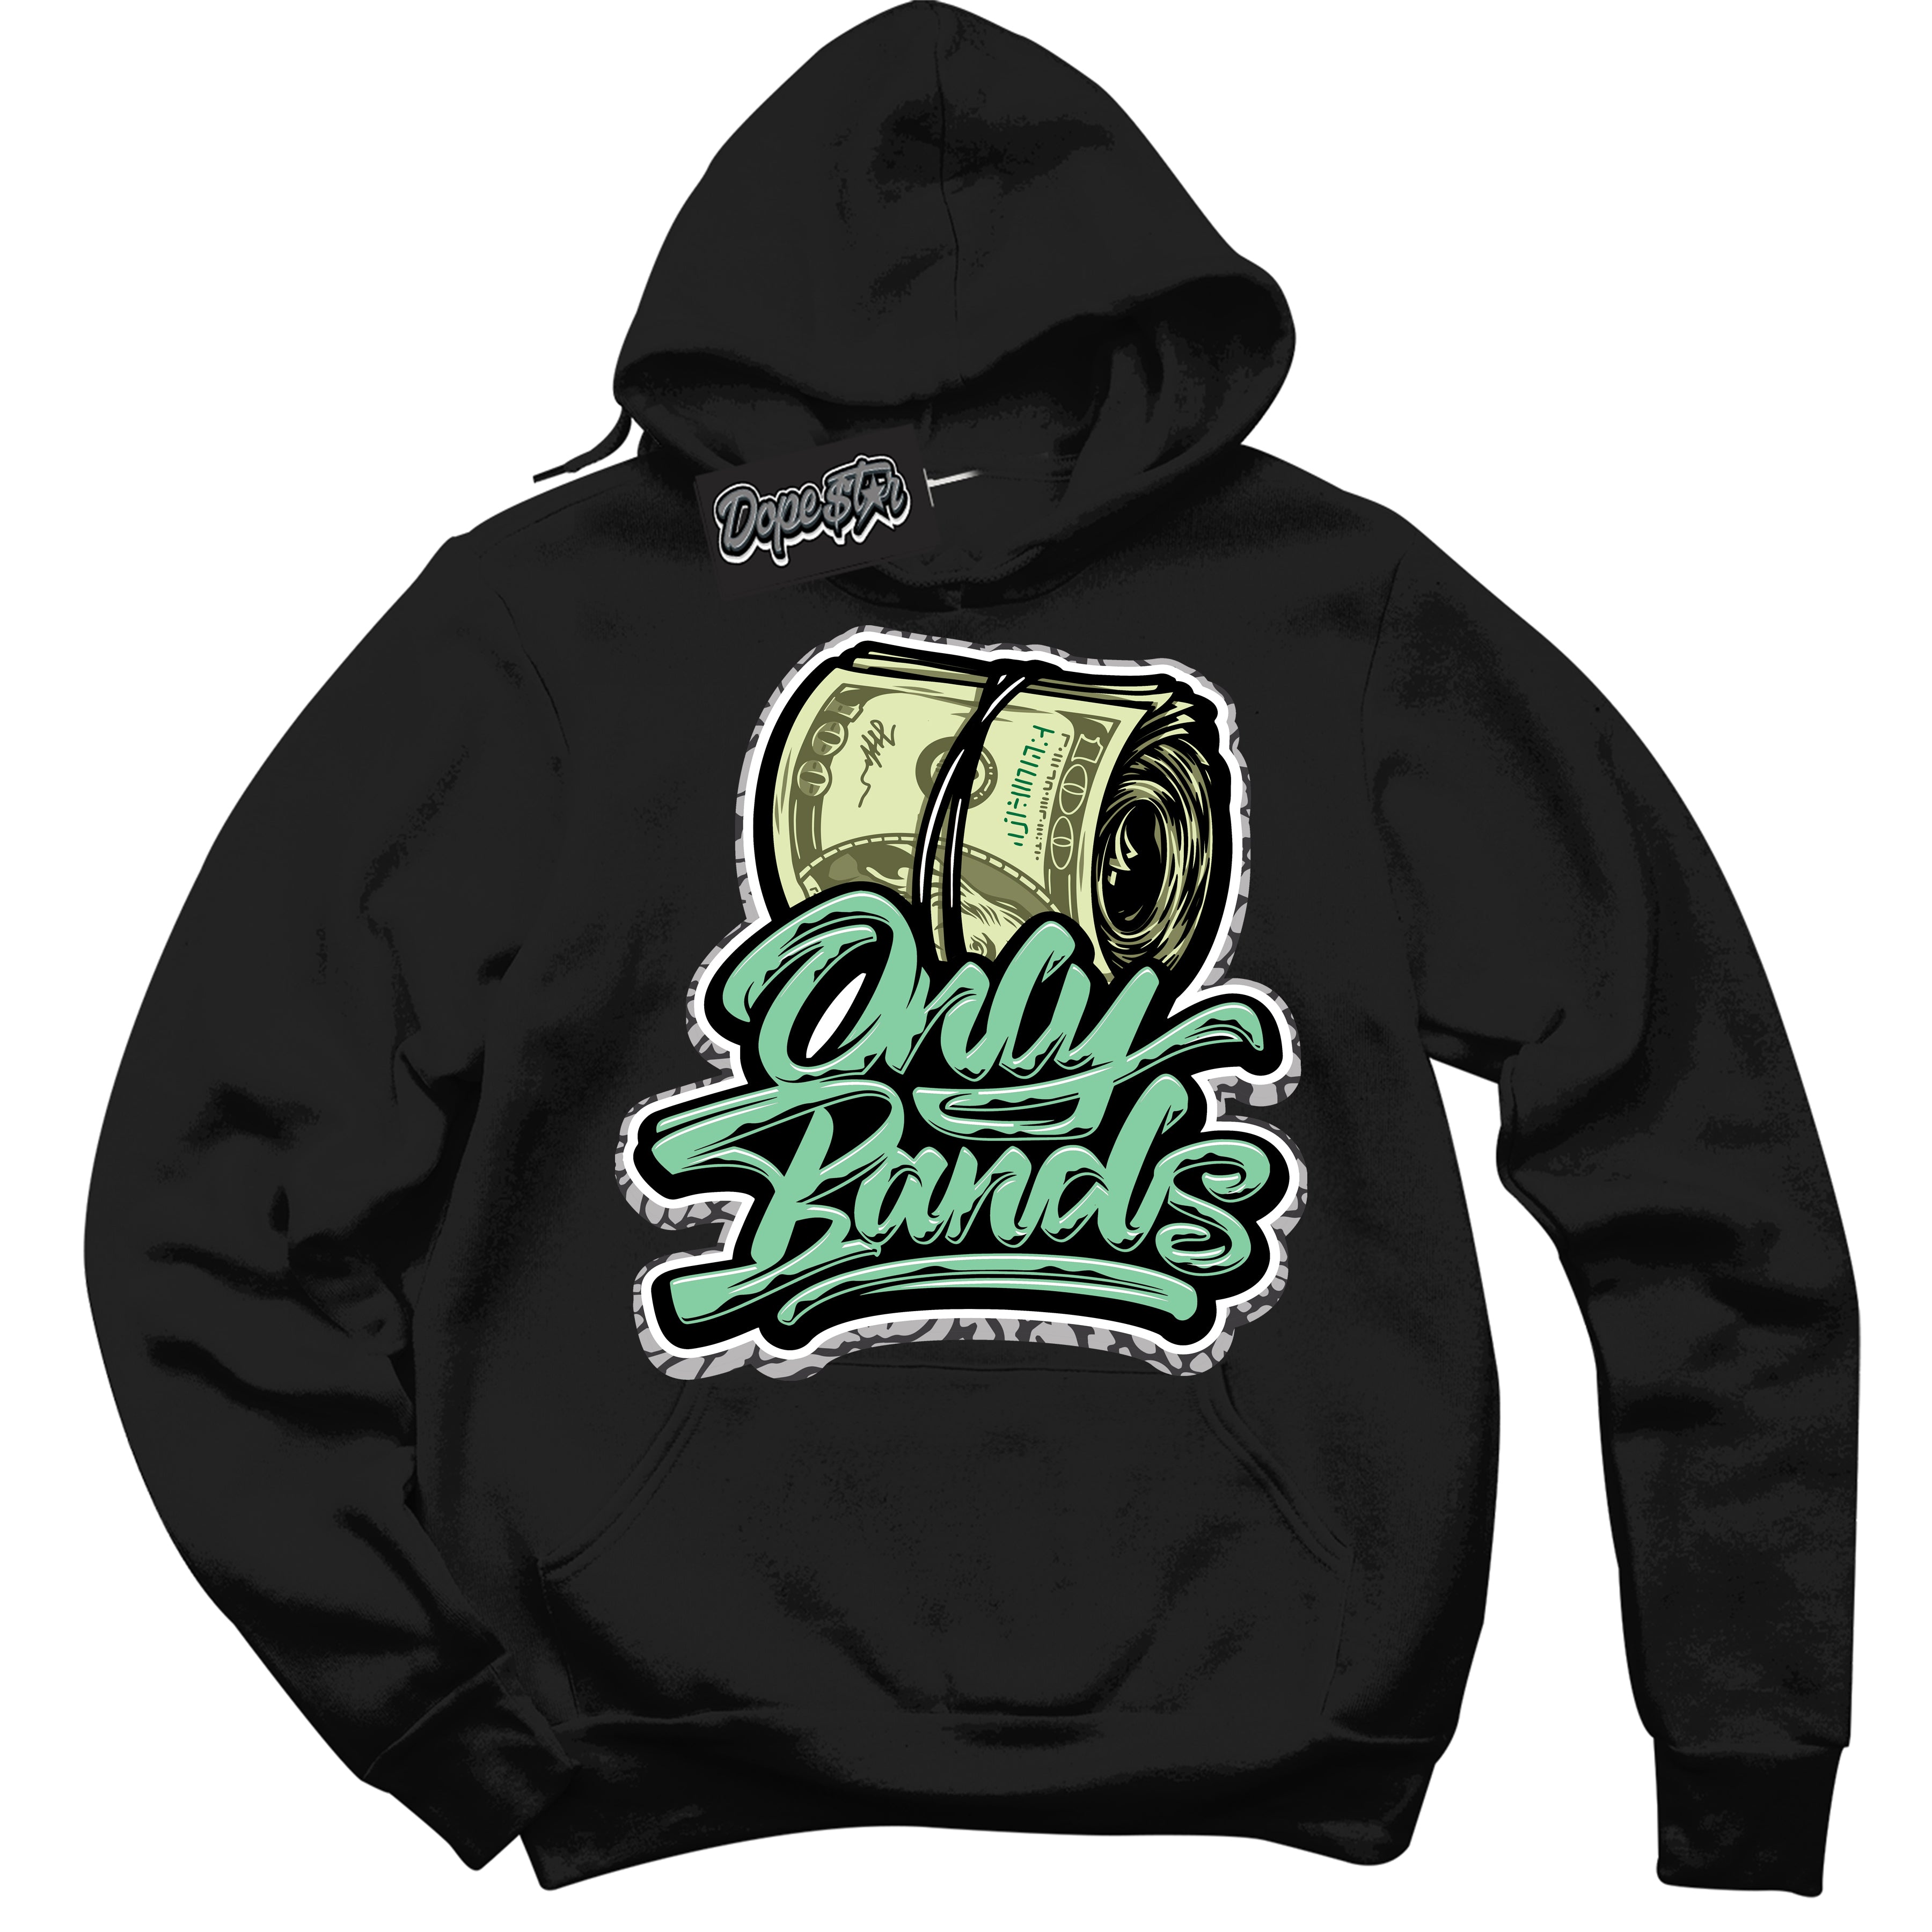 Cool Black Graphic DopeStar Hoodie with “ Only Bands “ print, that perfectly matches Green Glow 3S sneakers